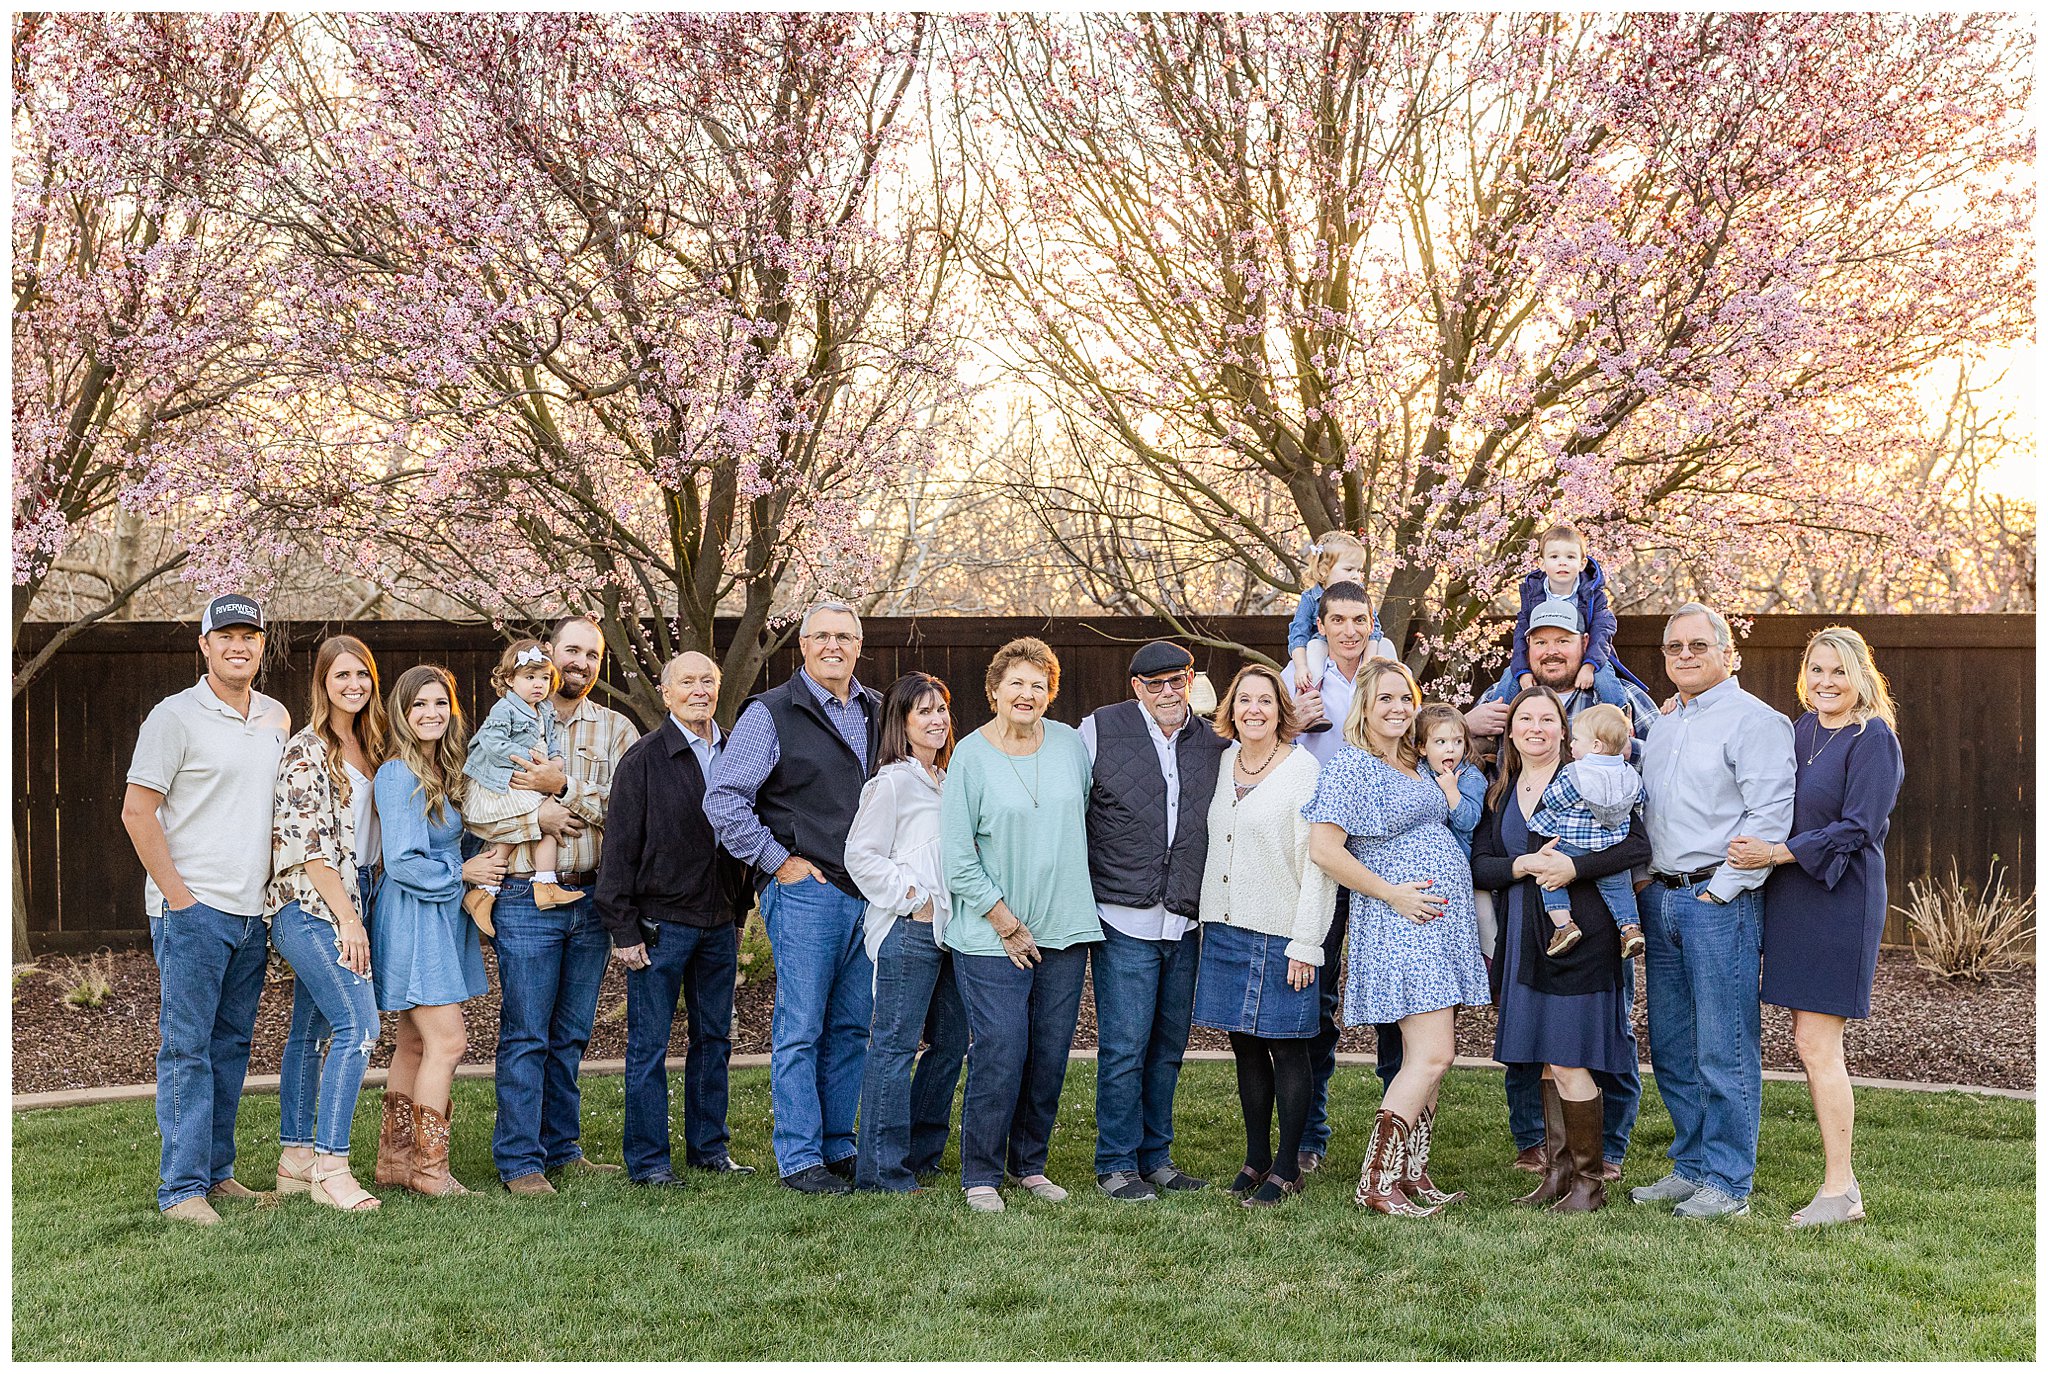 Large Extended Family in Blue at Private Residence | Helen + Bill